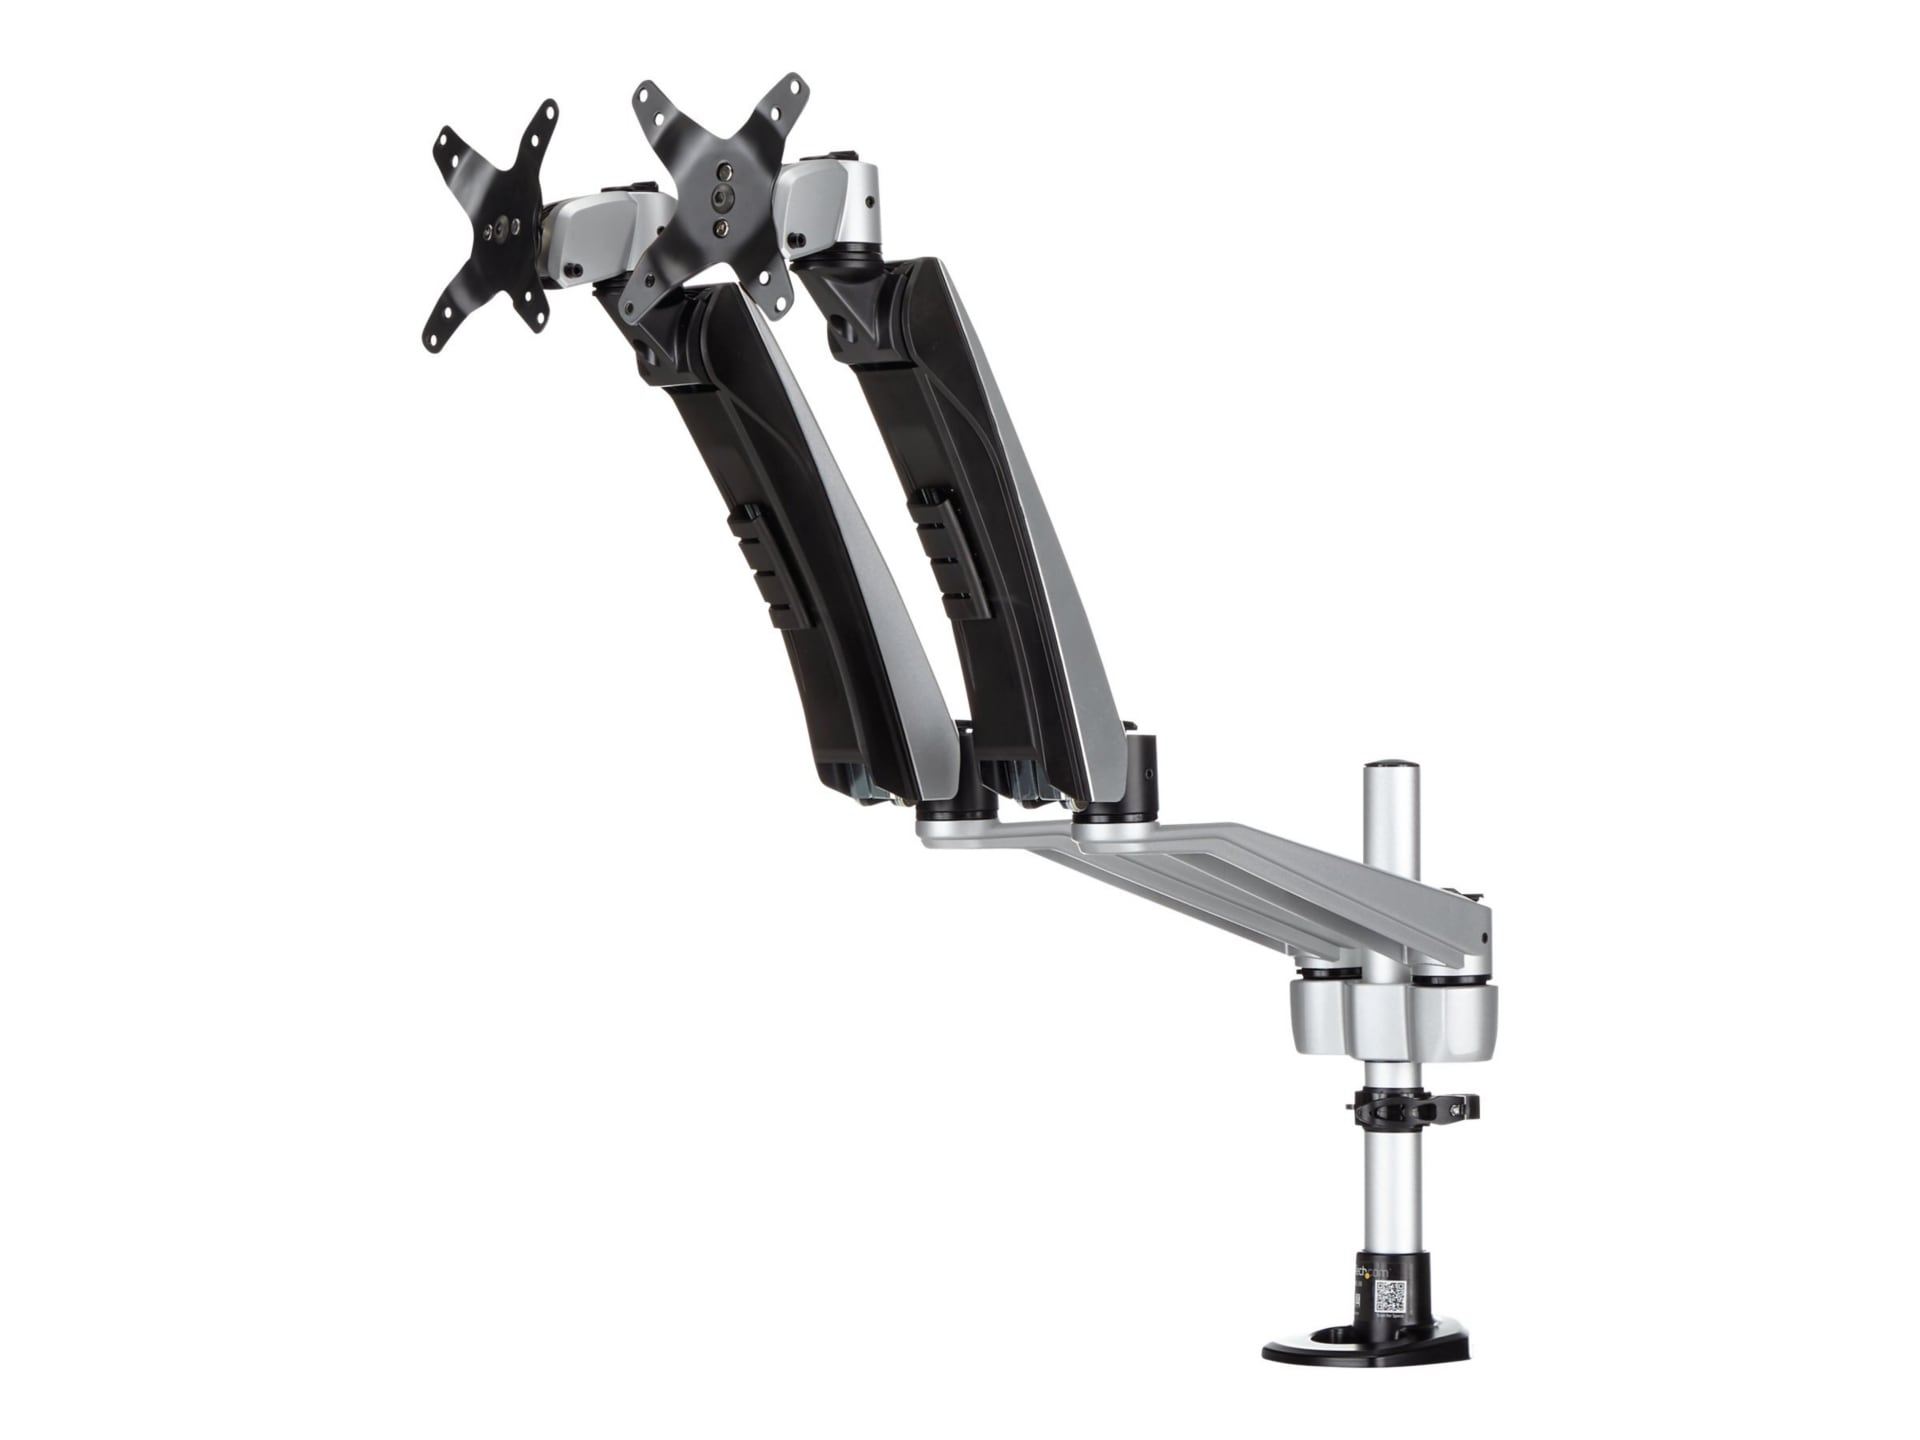 StarTech.com Desk Mount Dual Monitor Arm - Articulating - Up to 30" Display